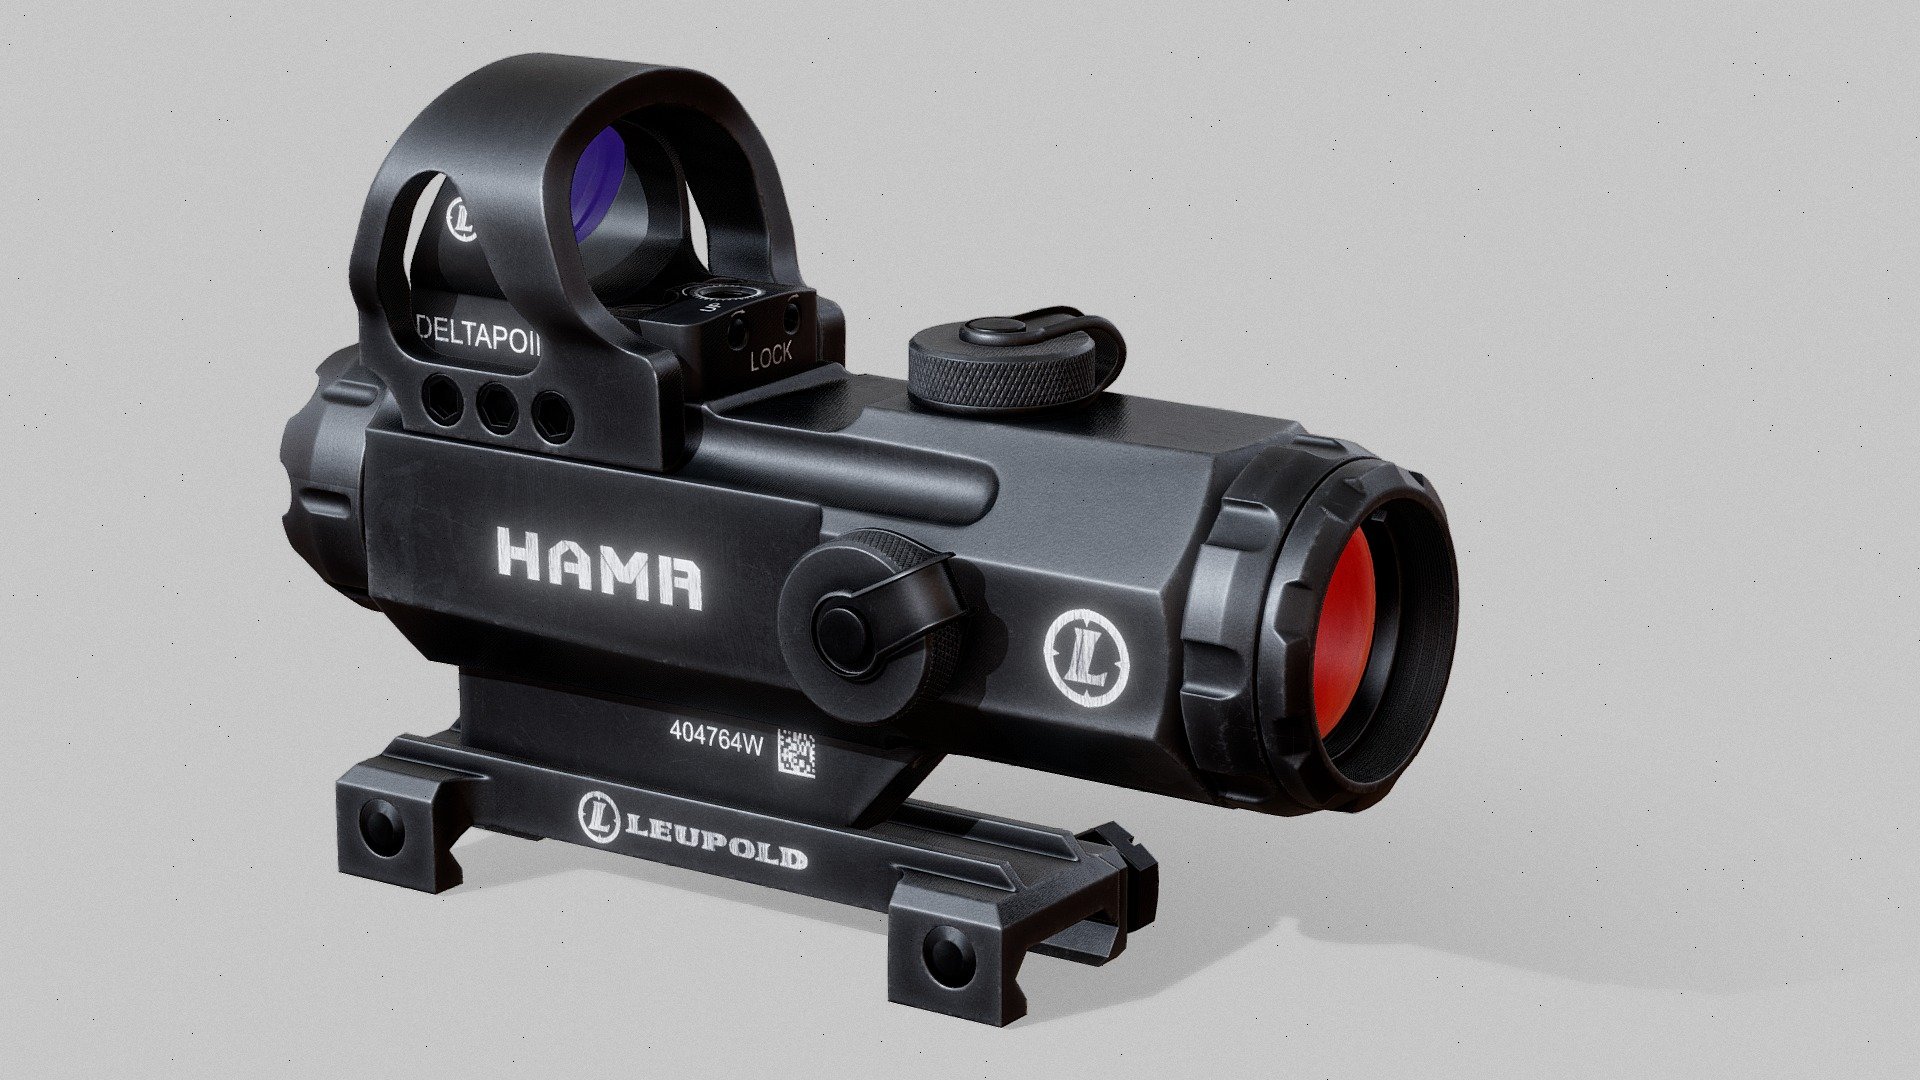 3D model of the Leupold Mark 4 HAMR Scope and the Deltapoint red dot sight.

Made in Blender, Substance Painter, and Marmoset Toolbag.

I used 4K Textures for the HAMR scope, and 1K texture (roughness only) for the HAMR lens.

And 4K texture for the Deltapoint sight, and 1k texture for the Deltapoint lens.

HAMR Polycount:10042

HAMR Vertex count:18990

Deltapoint Polycount:4510

Deltapoint Vertex:2335 - Leupold Mark 4 HAMR Scope - Buy Royalty Free 3D model by ferasabdallah 3d model